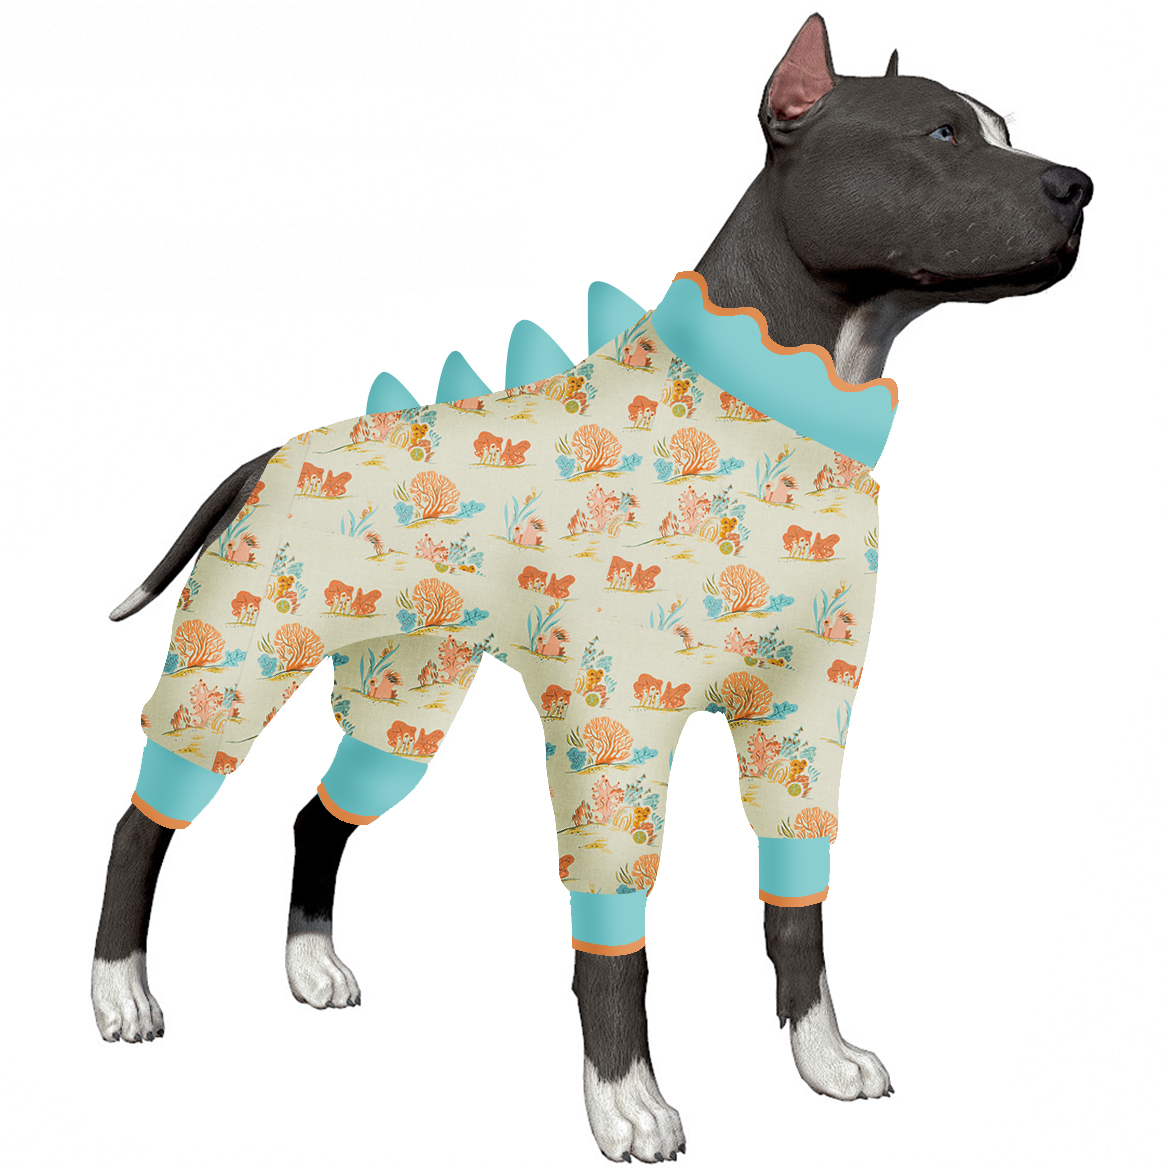 LovinPet Large Dogs Jammies, Large Dog Pajamas, Anti Licking Dog Recovery Suit, Lightweight Fashion Coral Peach Prints Onesies for Dog Clothing, UV Protection, Easy Wearing Adorable Dog Jumpsuit